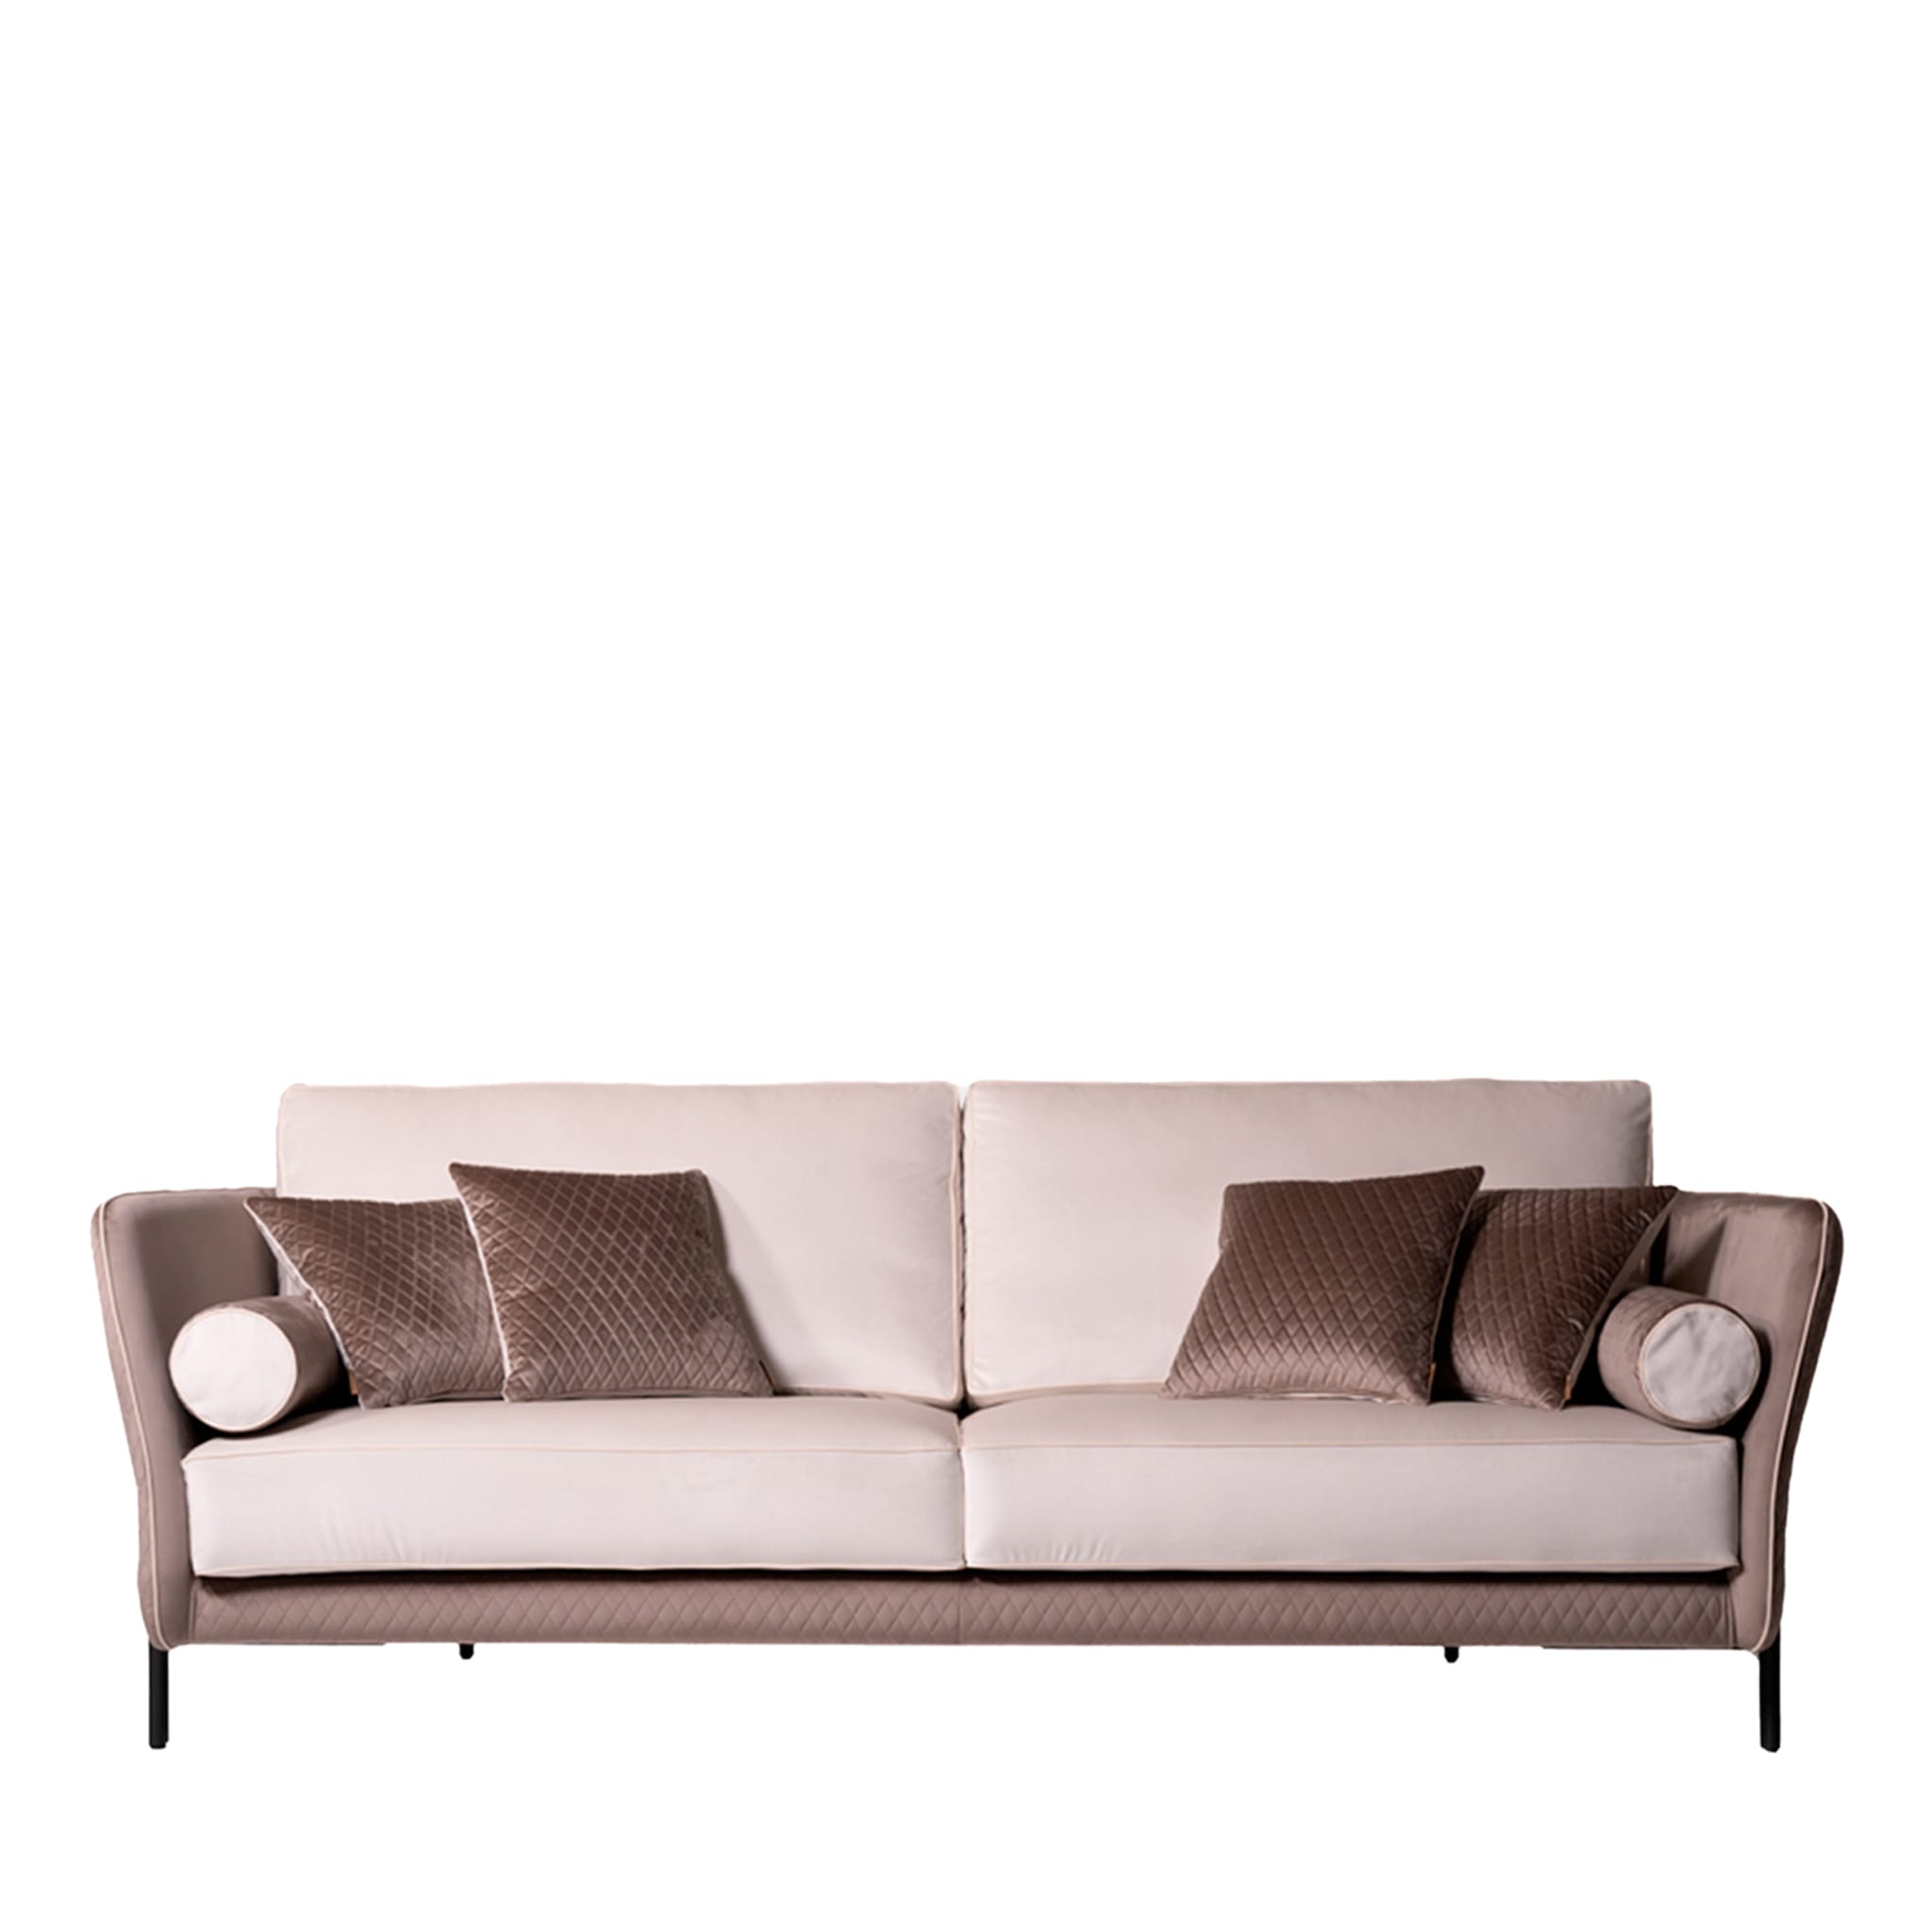 Universal Sofa by Marco and Giulio Mantellassi  - Main view